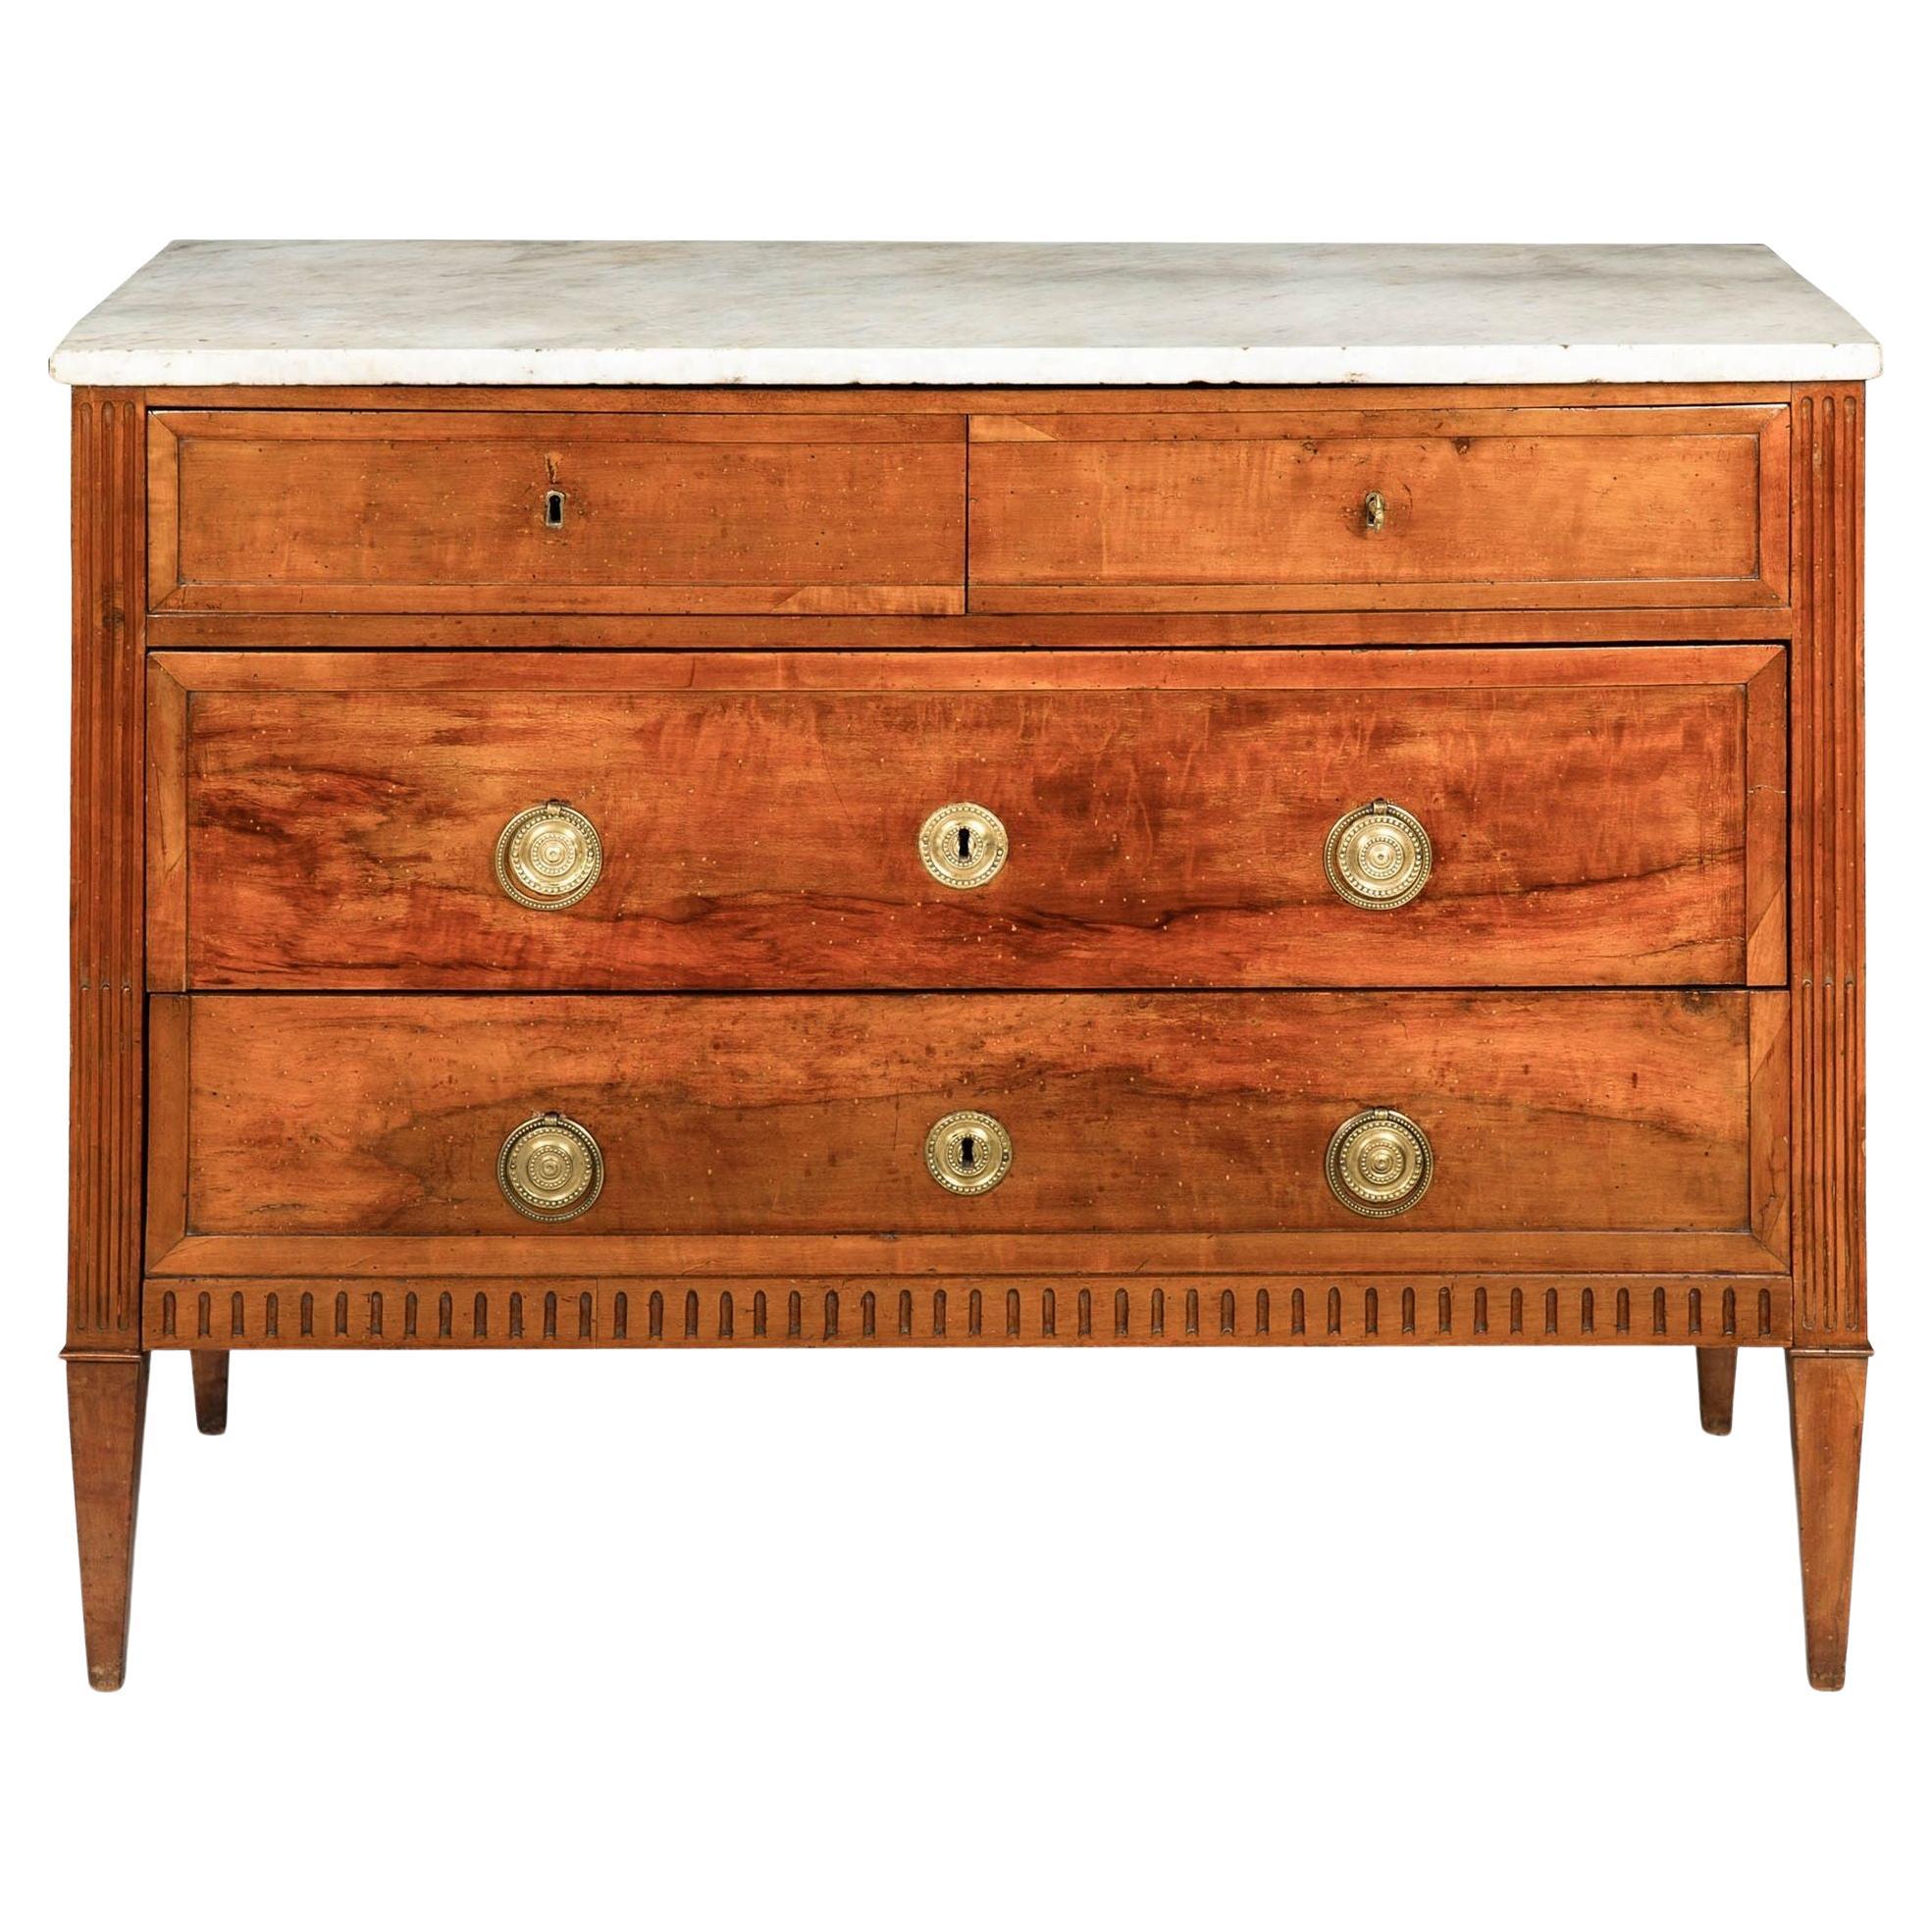 French Neoclassical Provincial Chest of Drawers Commode circa 1800 For Sale